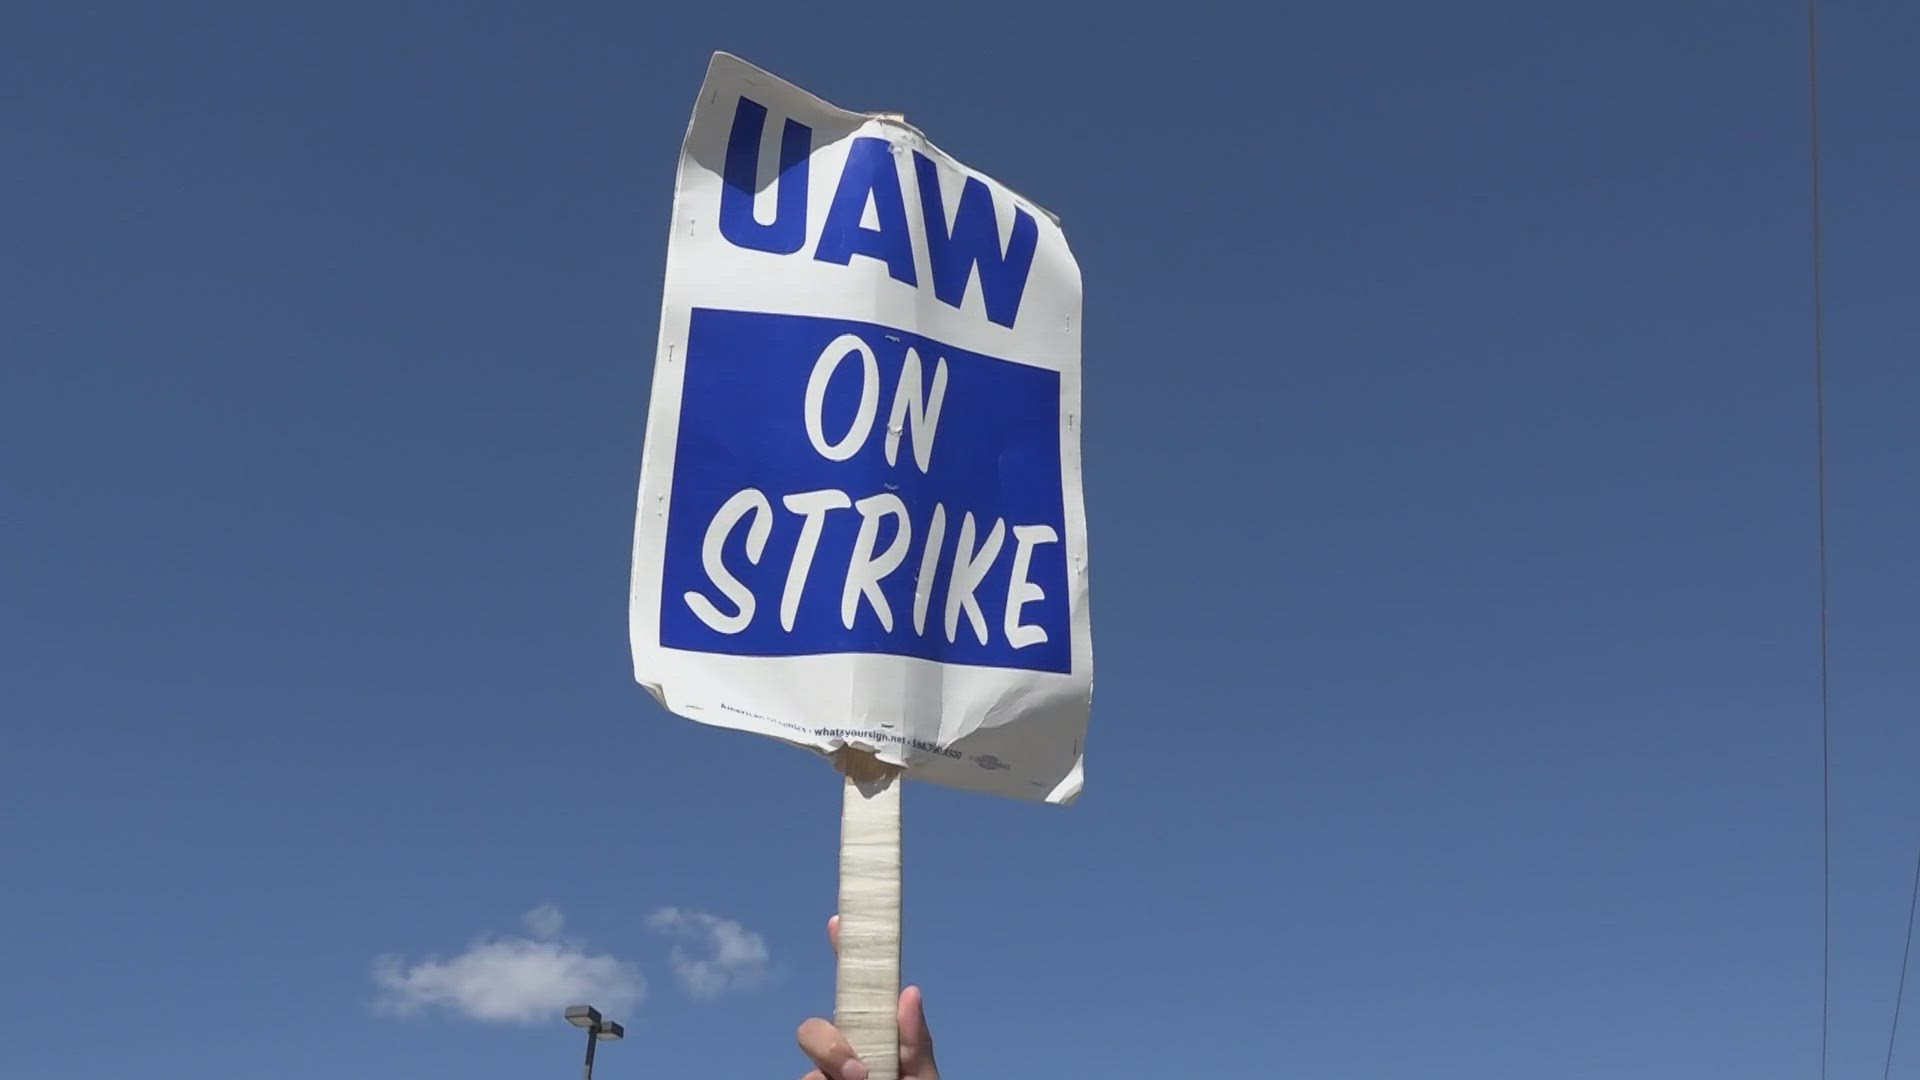 The UAW strike has reached day 11. If the strike lasts more than 30 days, it's going to start affecting more than those buying a new car.